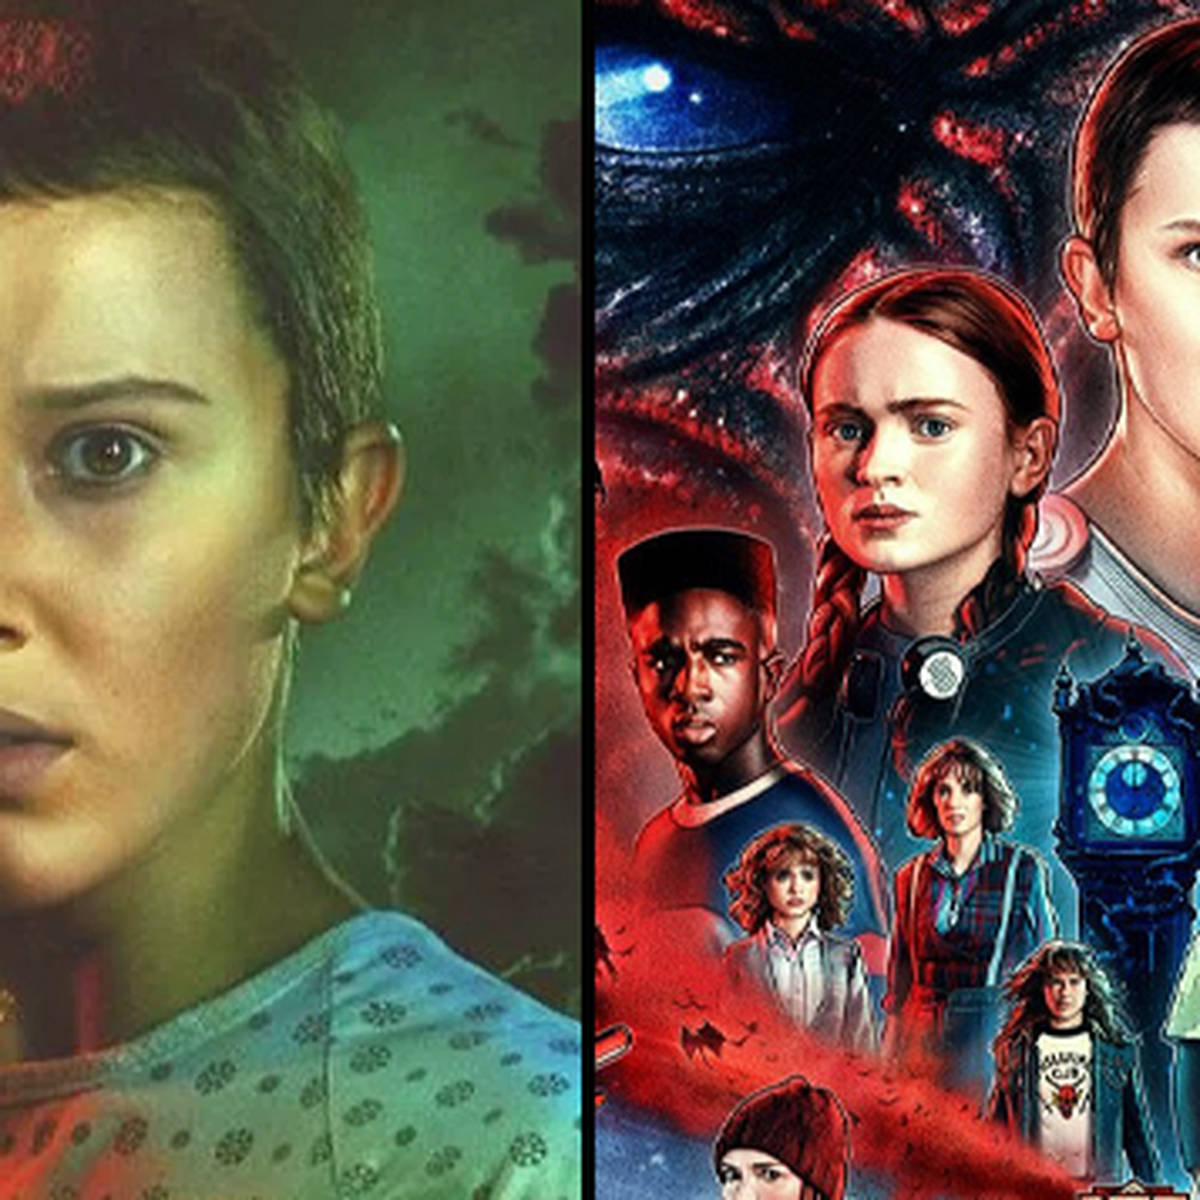 Stranger Things 4' Volume 2: How long are Episodes 8 and 9?